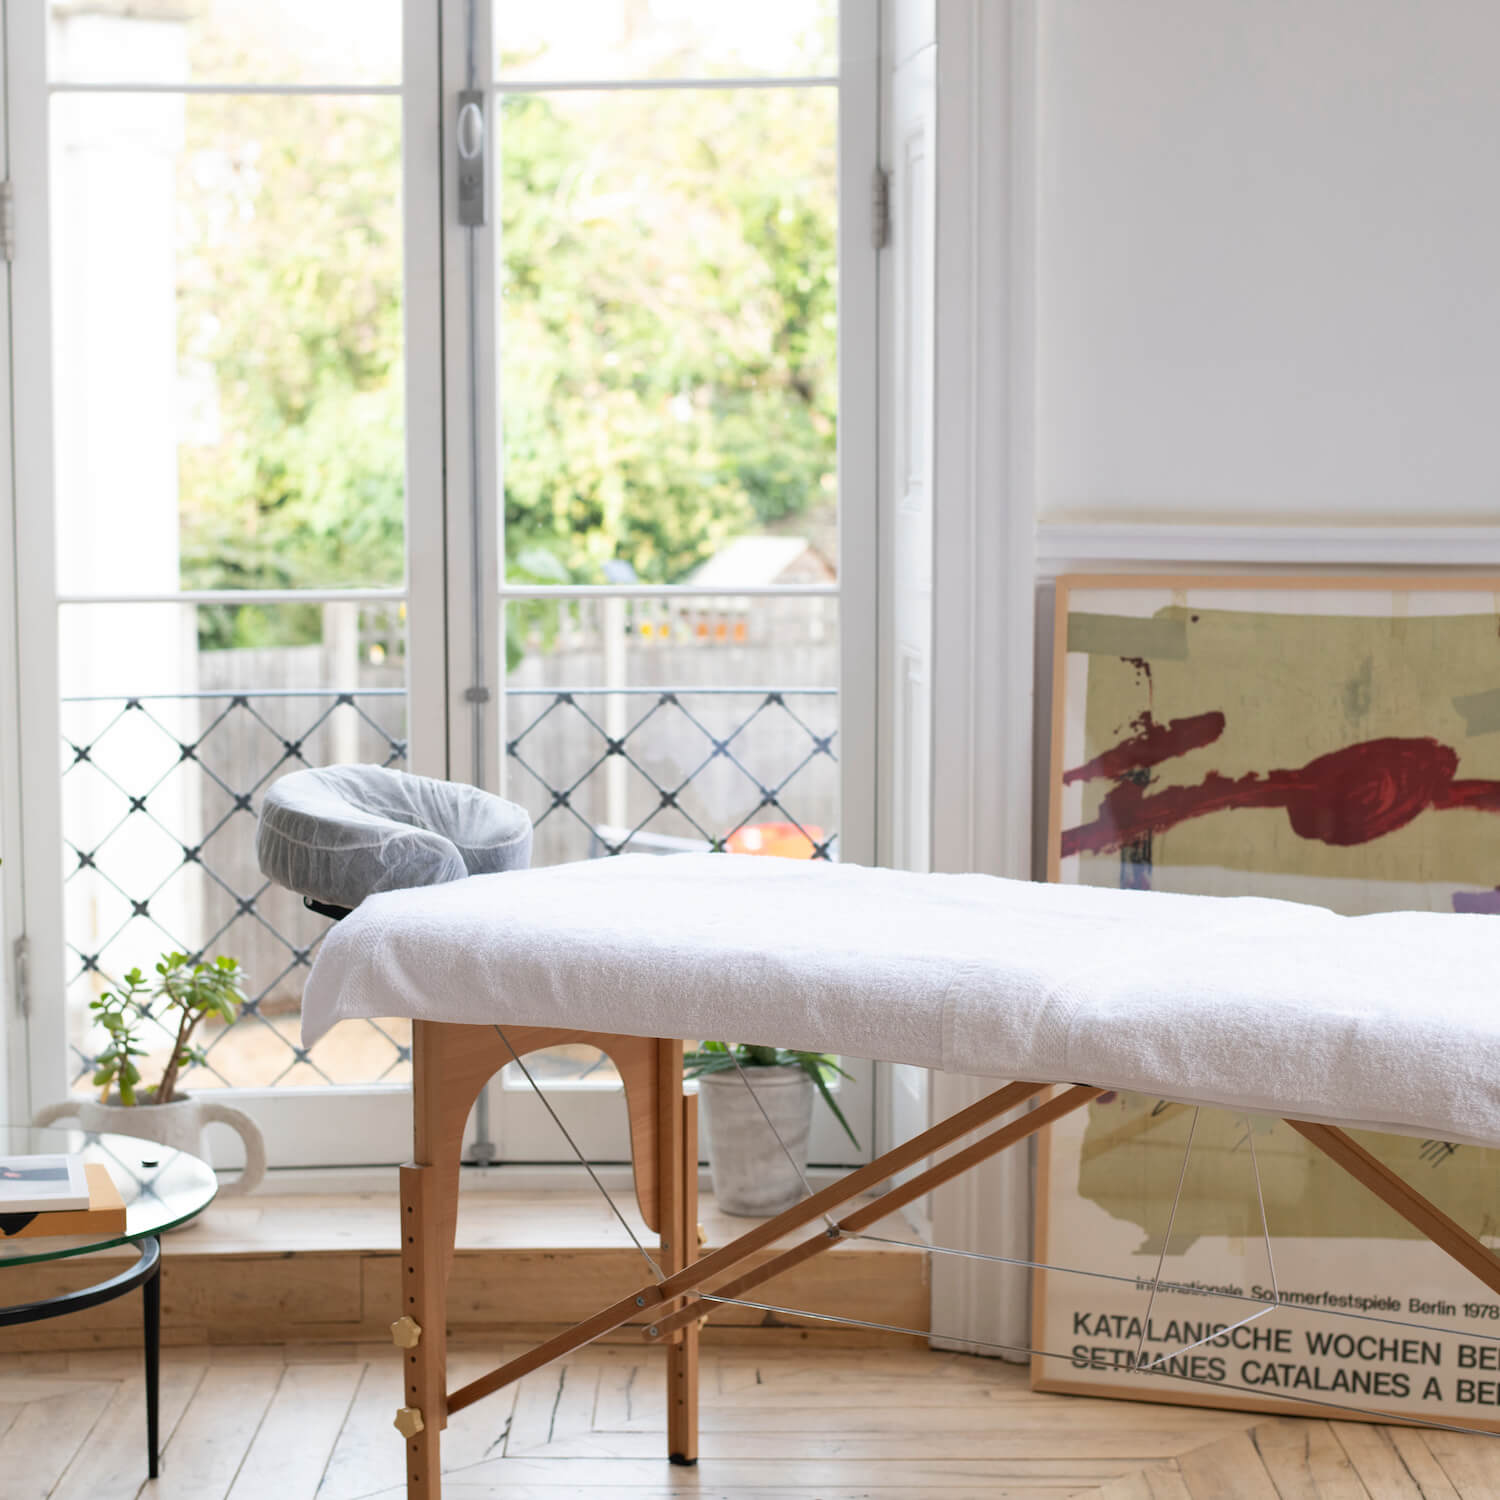 Portable massage table for home treatments